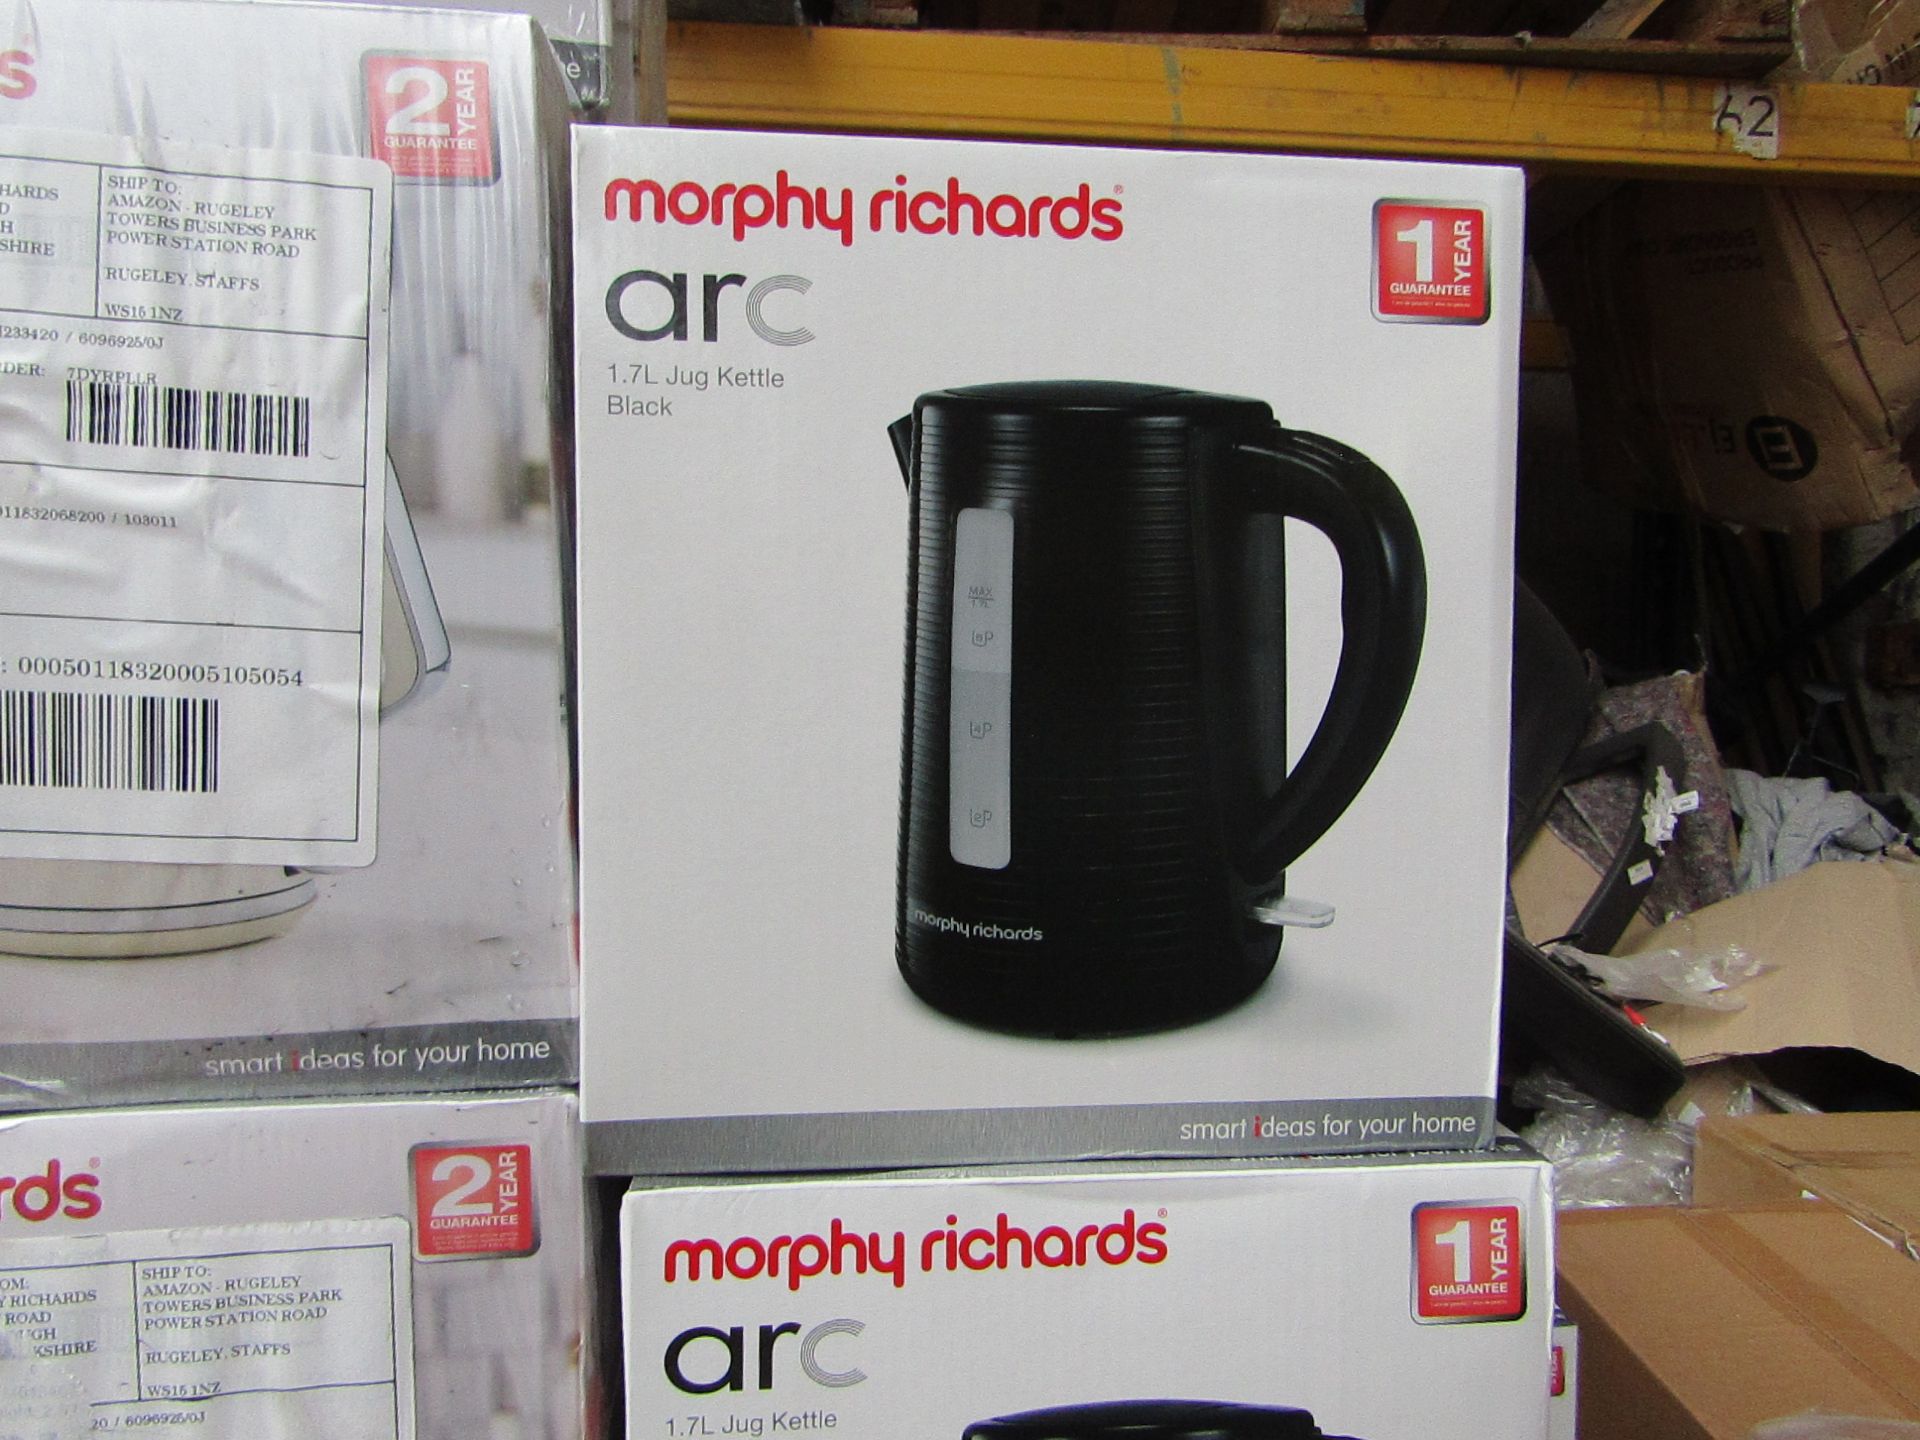 Morphy Richards Arc 1.7L jug black kettle, brand new and boxed. RRP £26.99